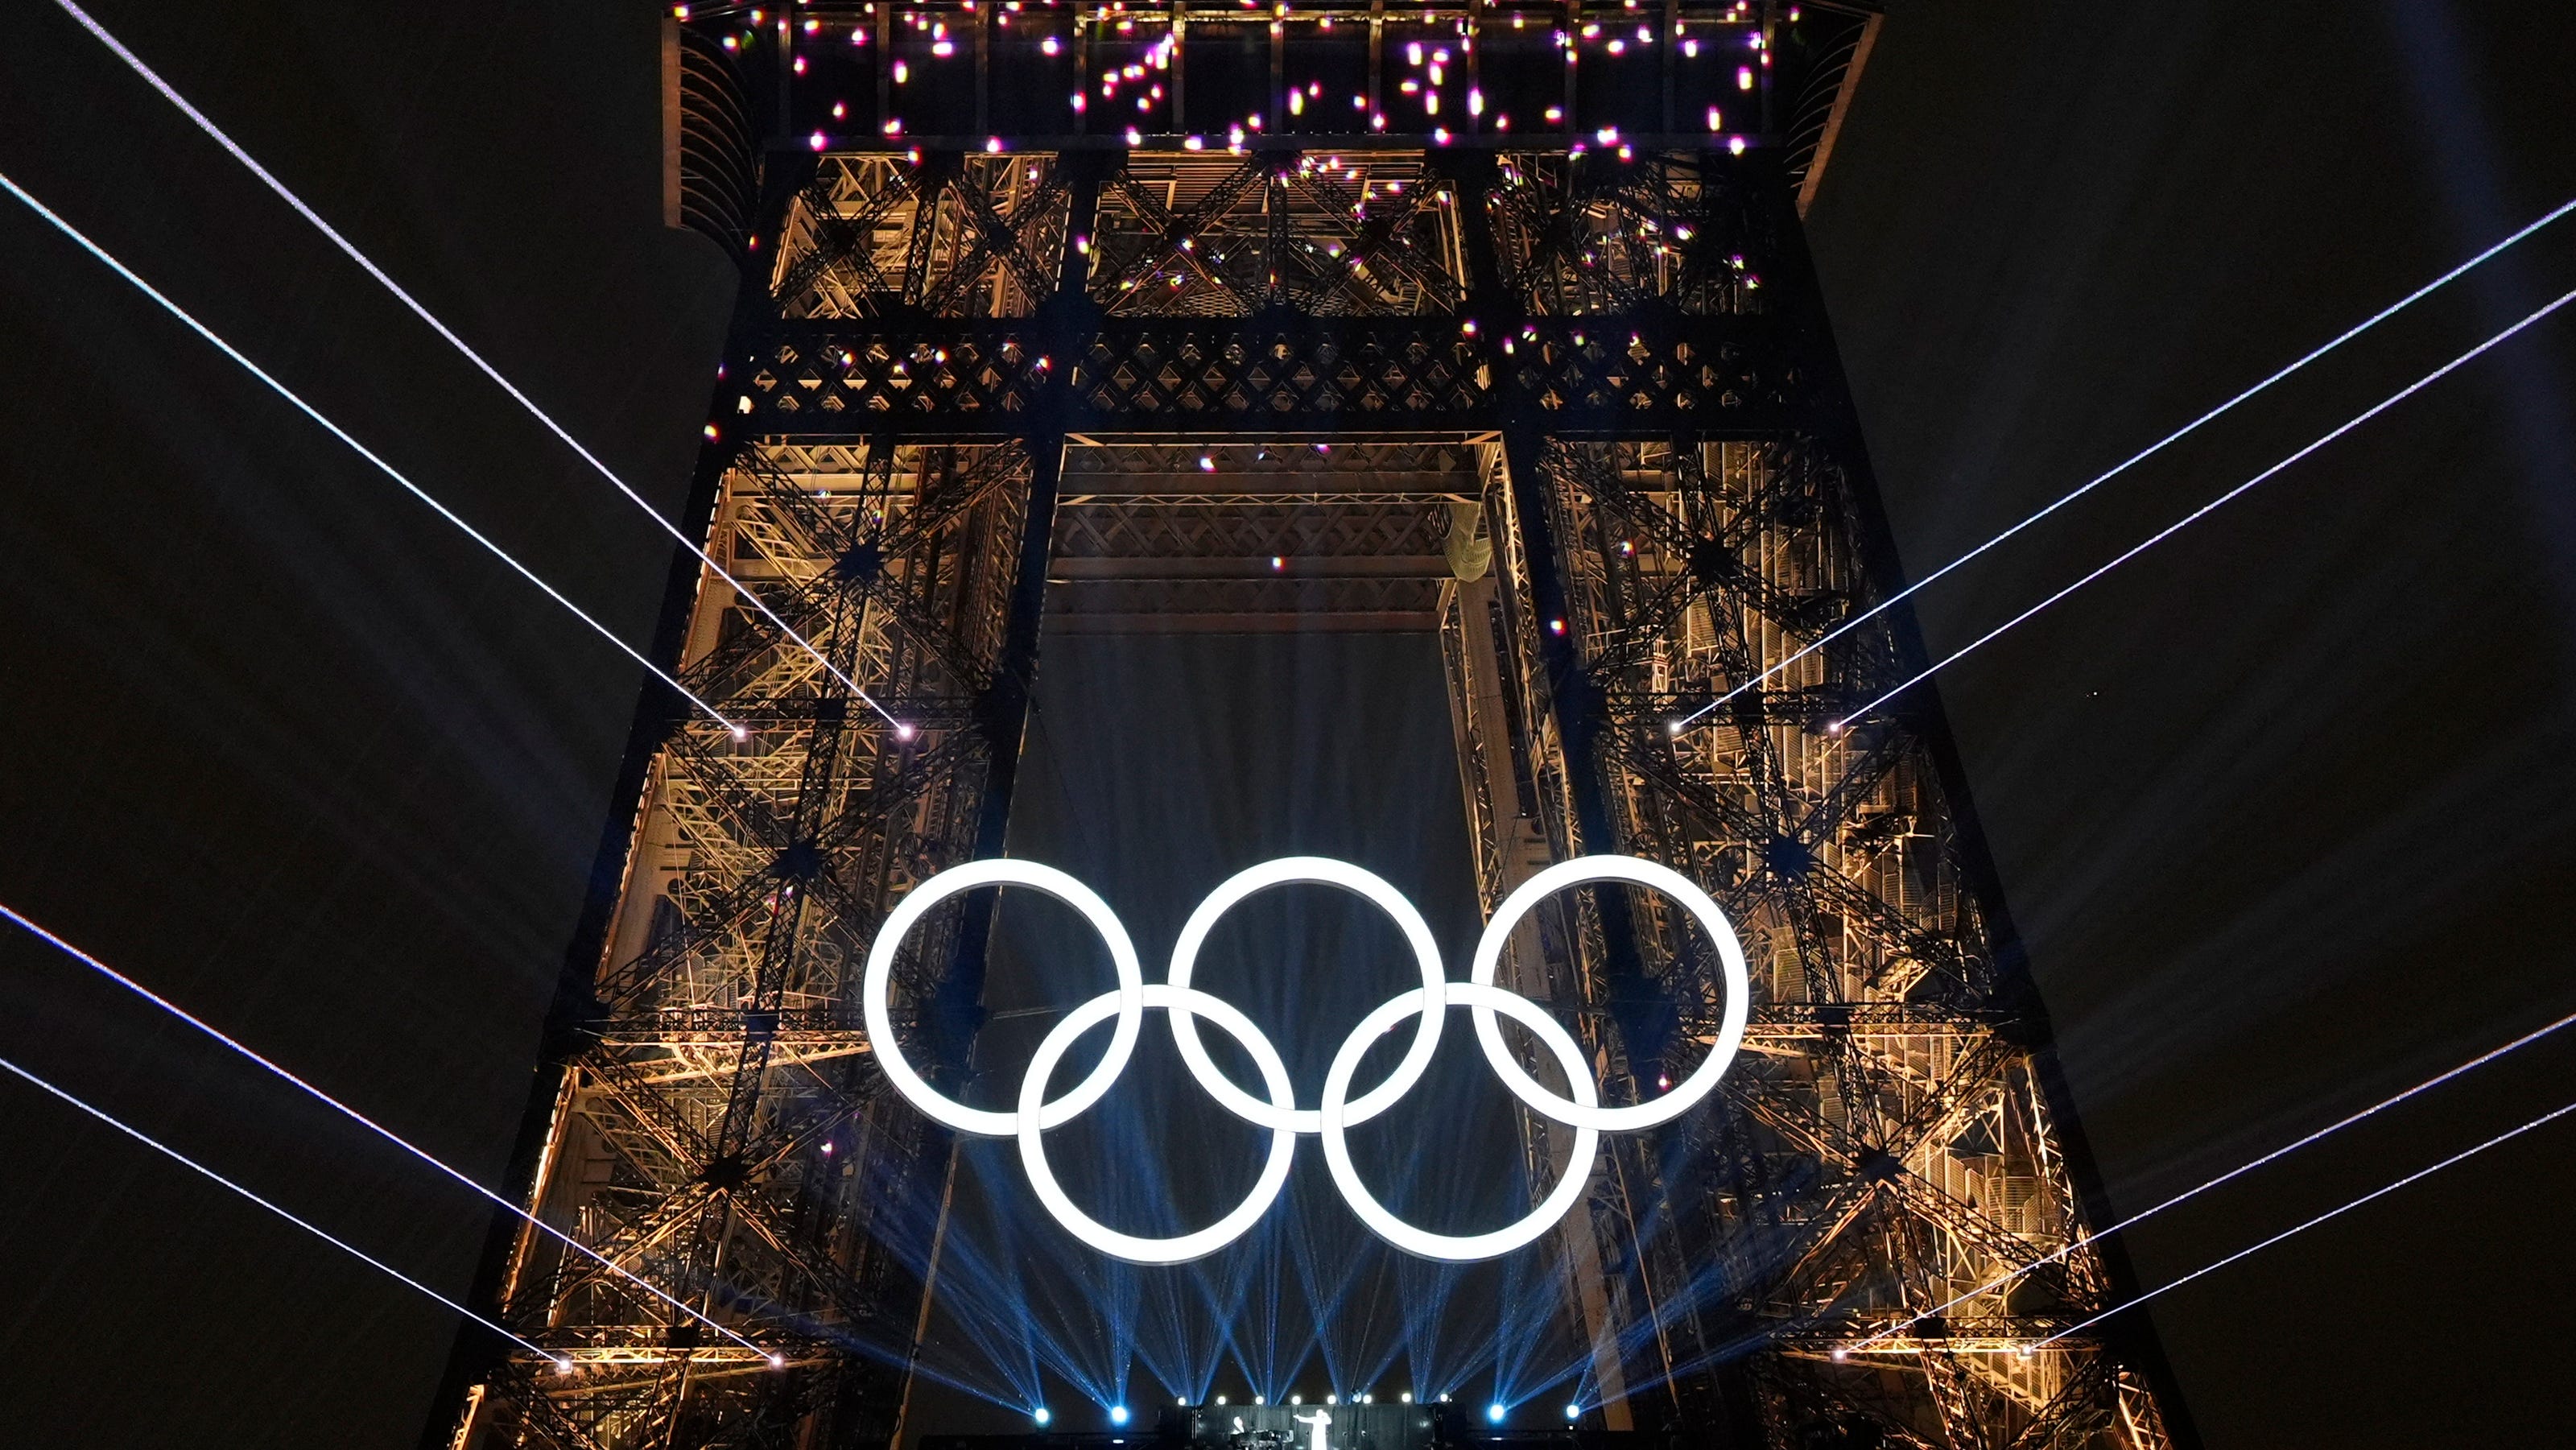 Paris Olympics supposedly promote tolerance. So why are protesters shouting 'Heil Hitler'?